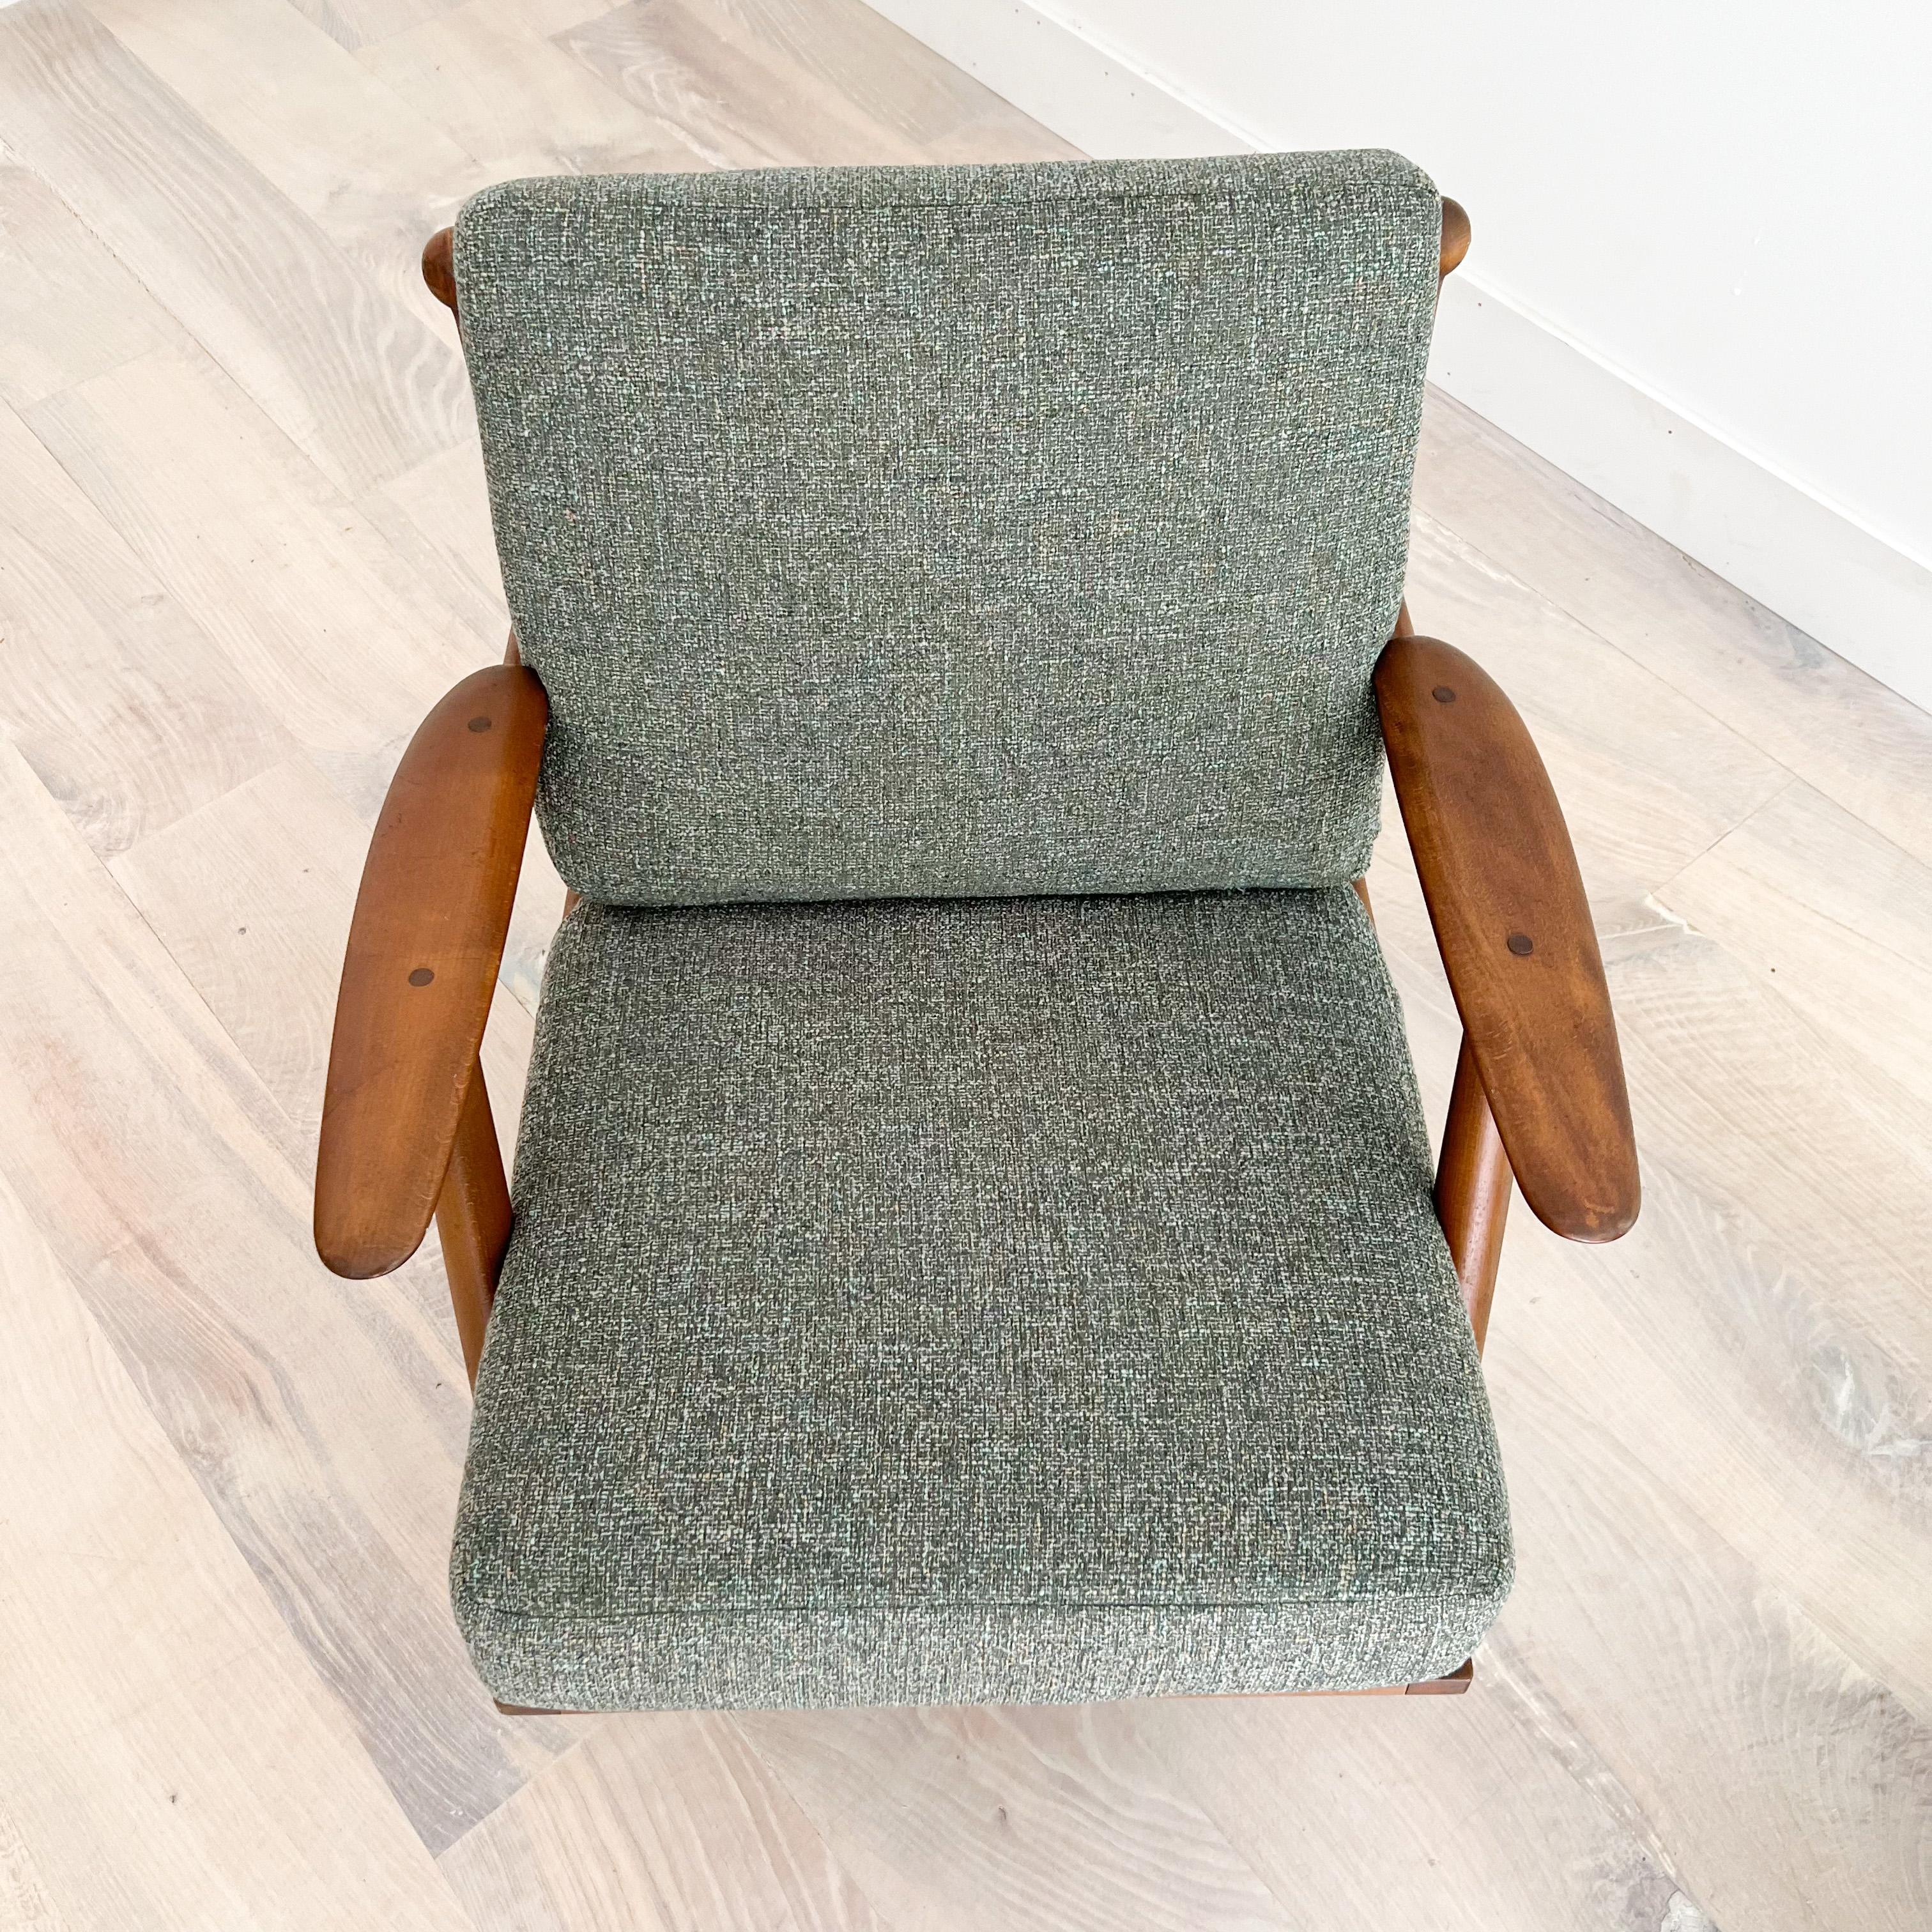 Mid-Century Modern danish lounge chair - stamped P. Jeppesens (made in Denmark). New webbing, foam and green/grey tweed upholstery. Some light scuffing/scratching to the chair frame from age appropriate wear. Super unique chair!